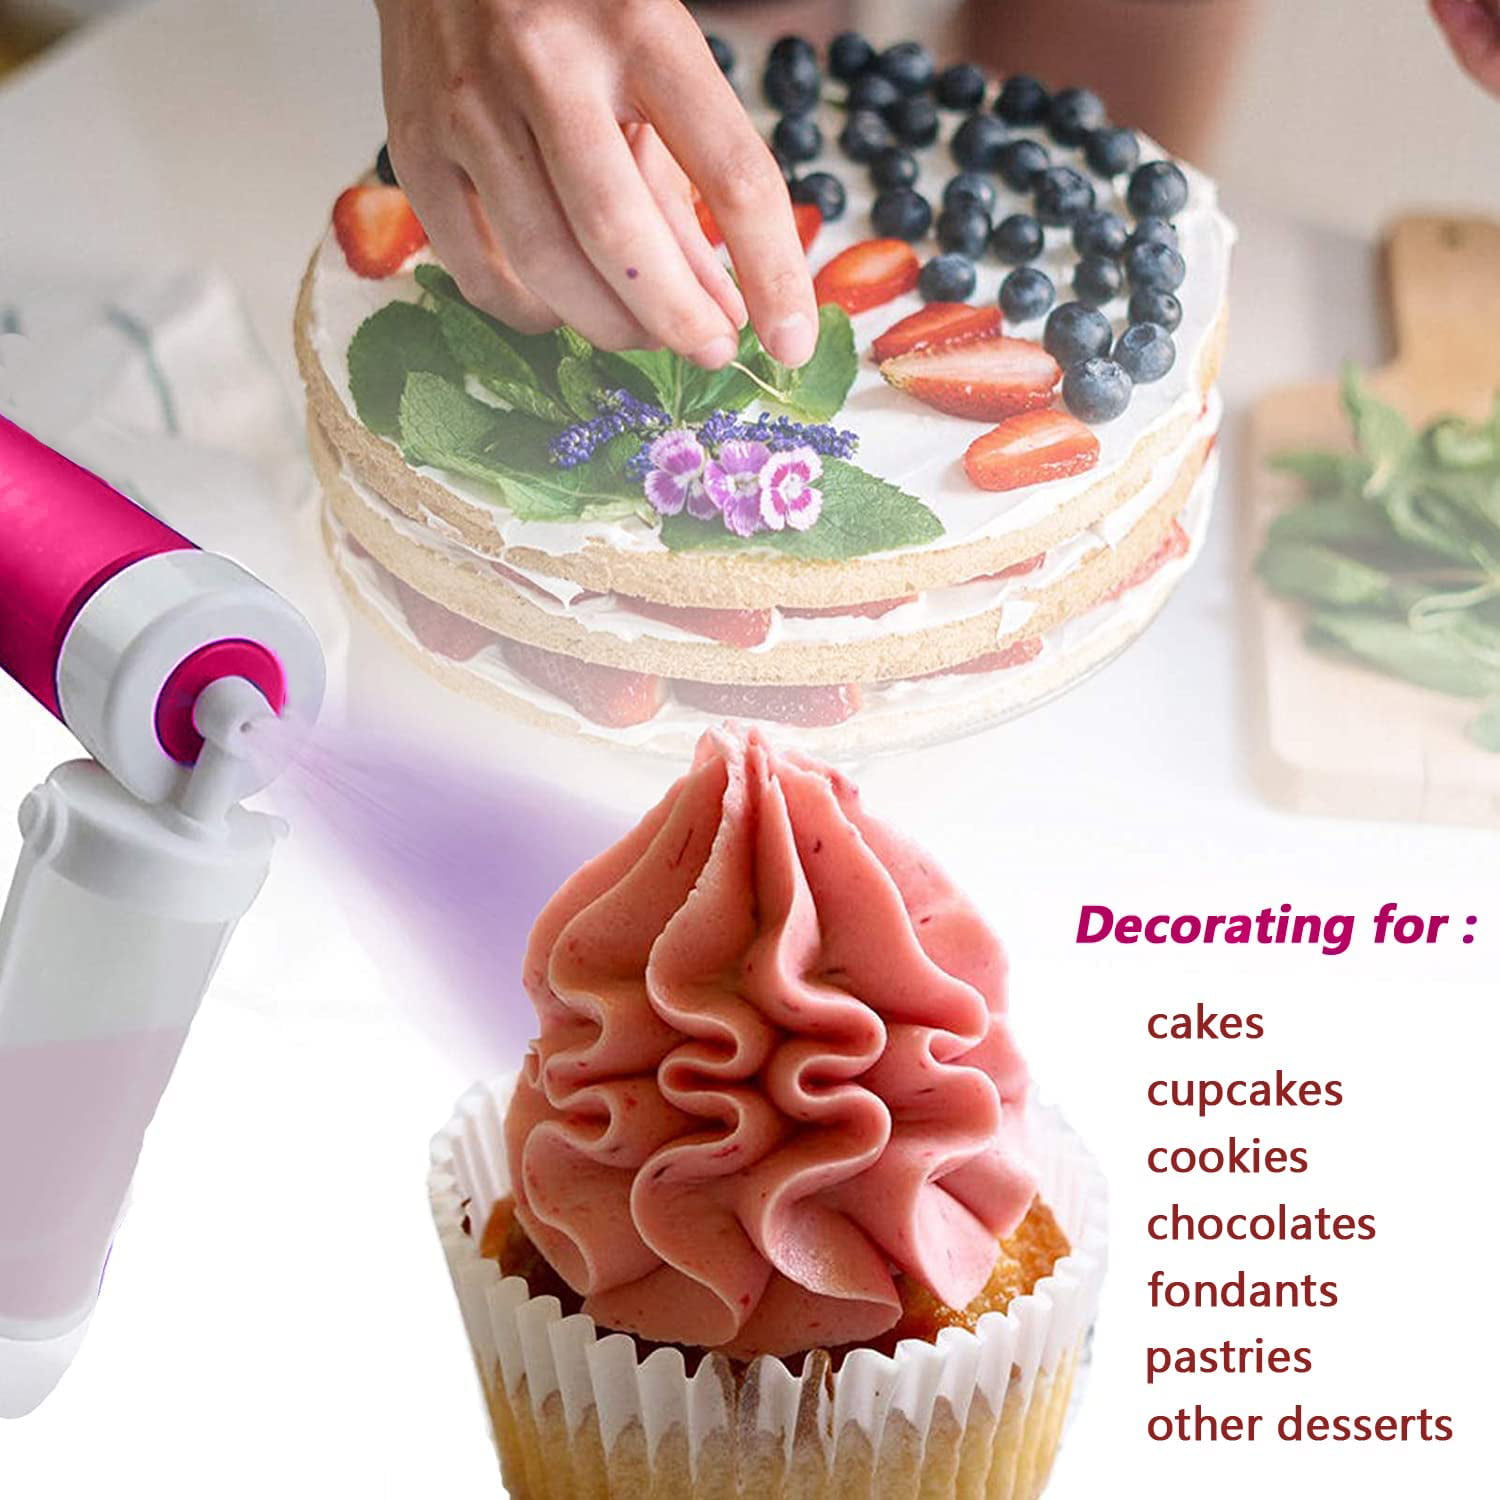 A Plastic Cake Glitter Decorating kit for Decorating Cakes Cupcakes And Desserts Manual Cake Airbrush Pump Baking Cake Spray Tube Baking Tool 